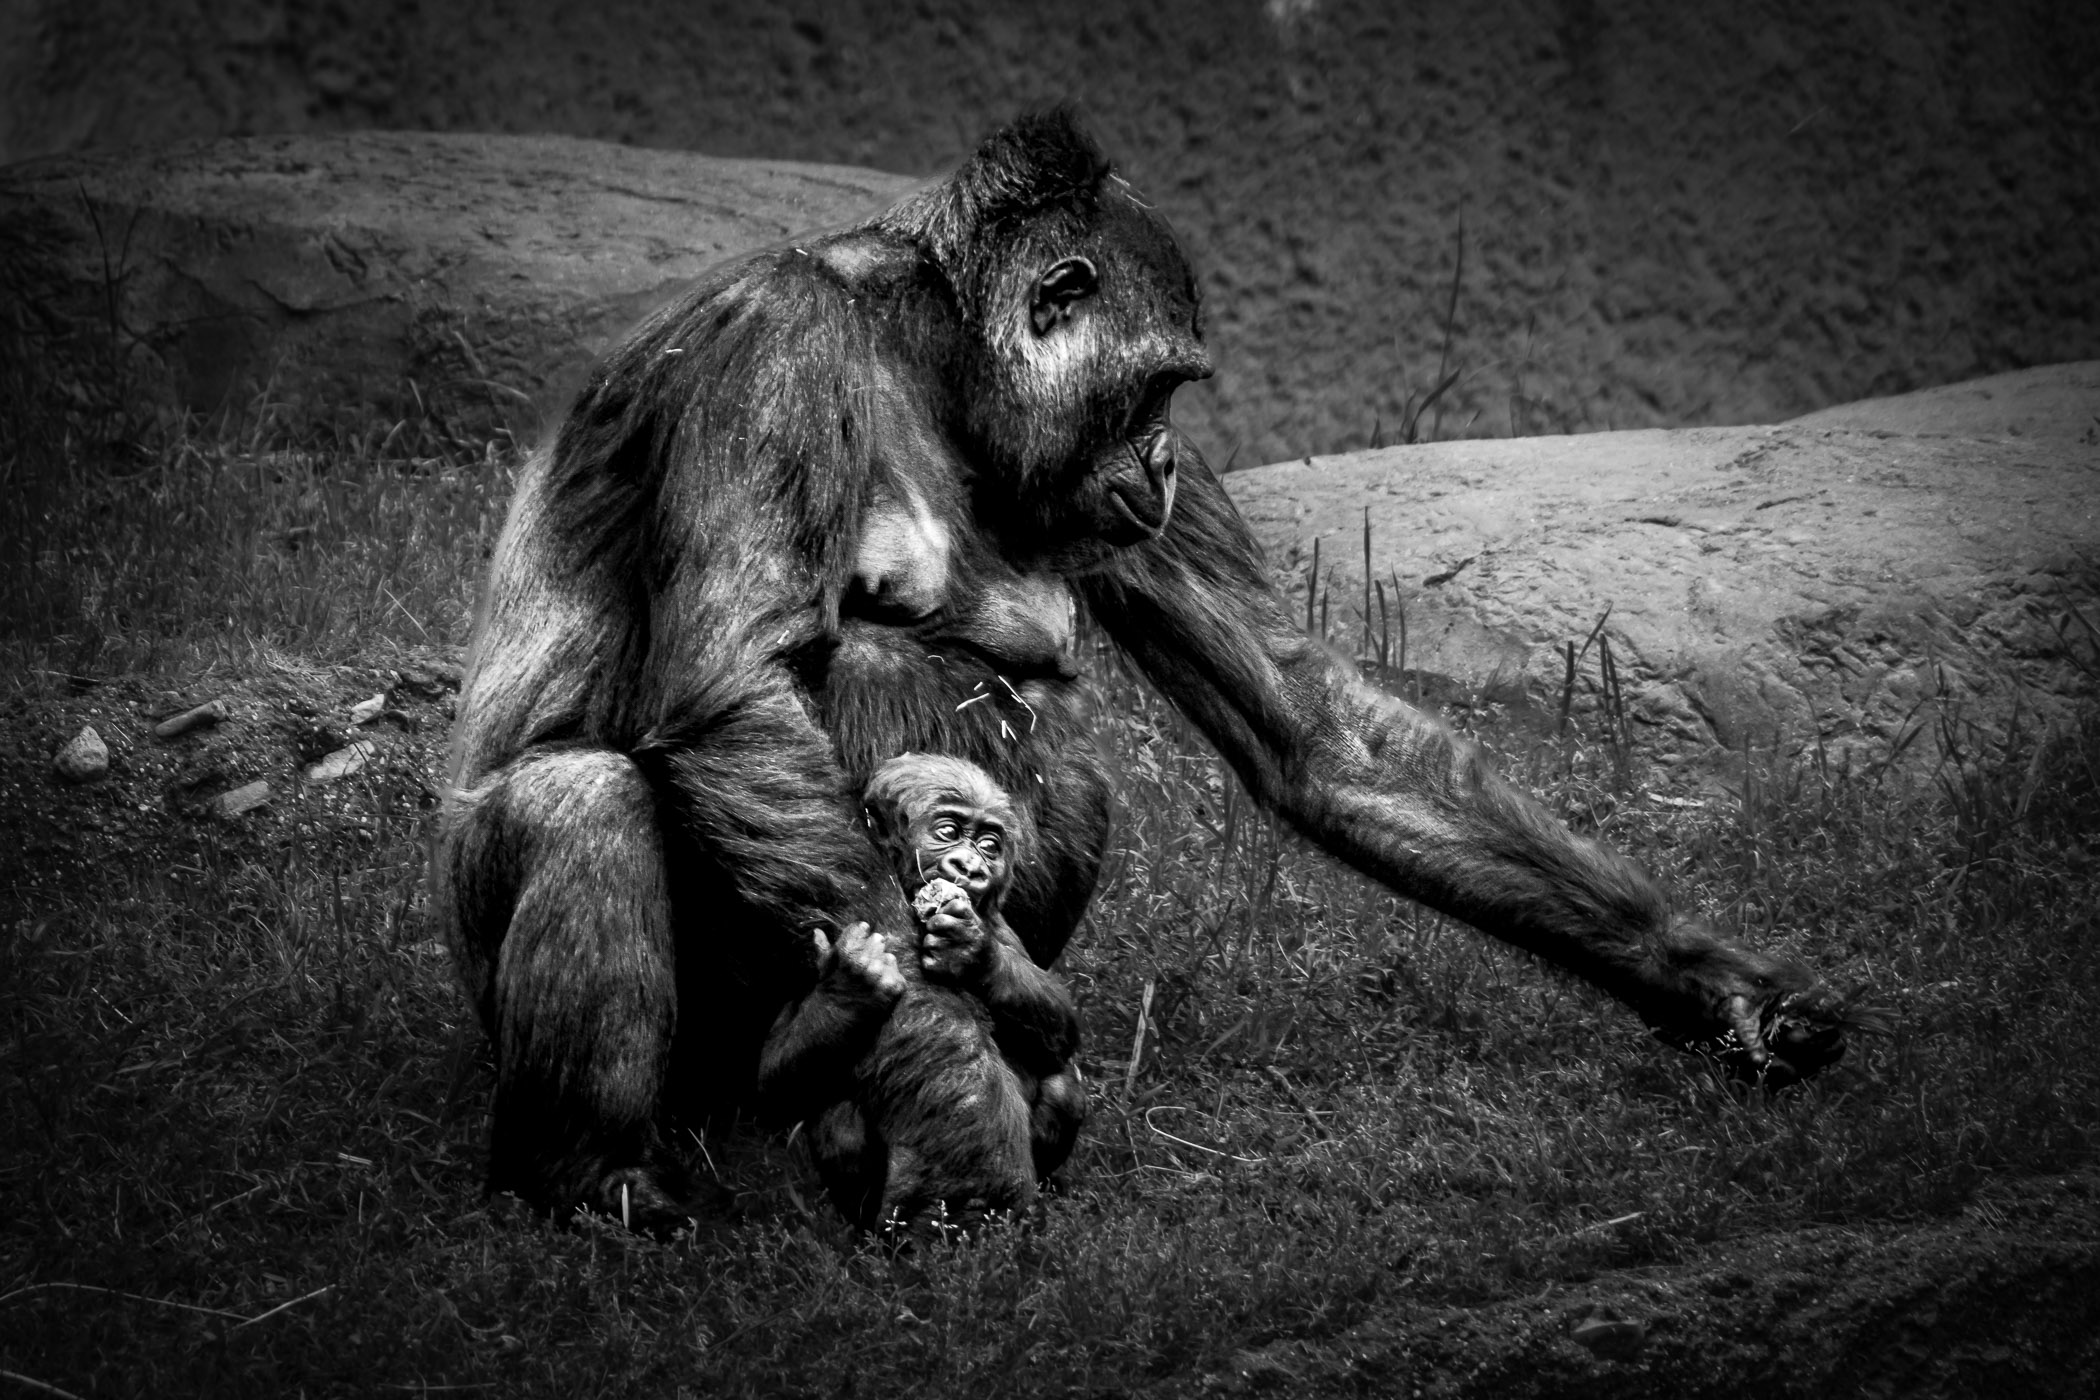 A mother gorilla and her young son at the Fort Worth Zoo, Texas.